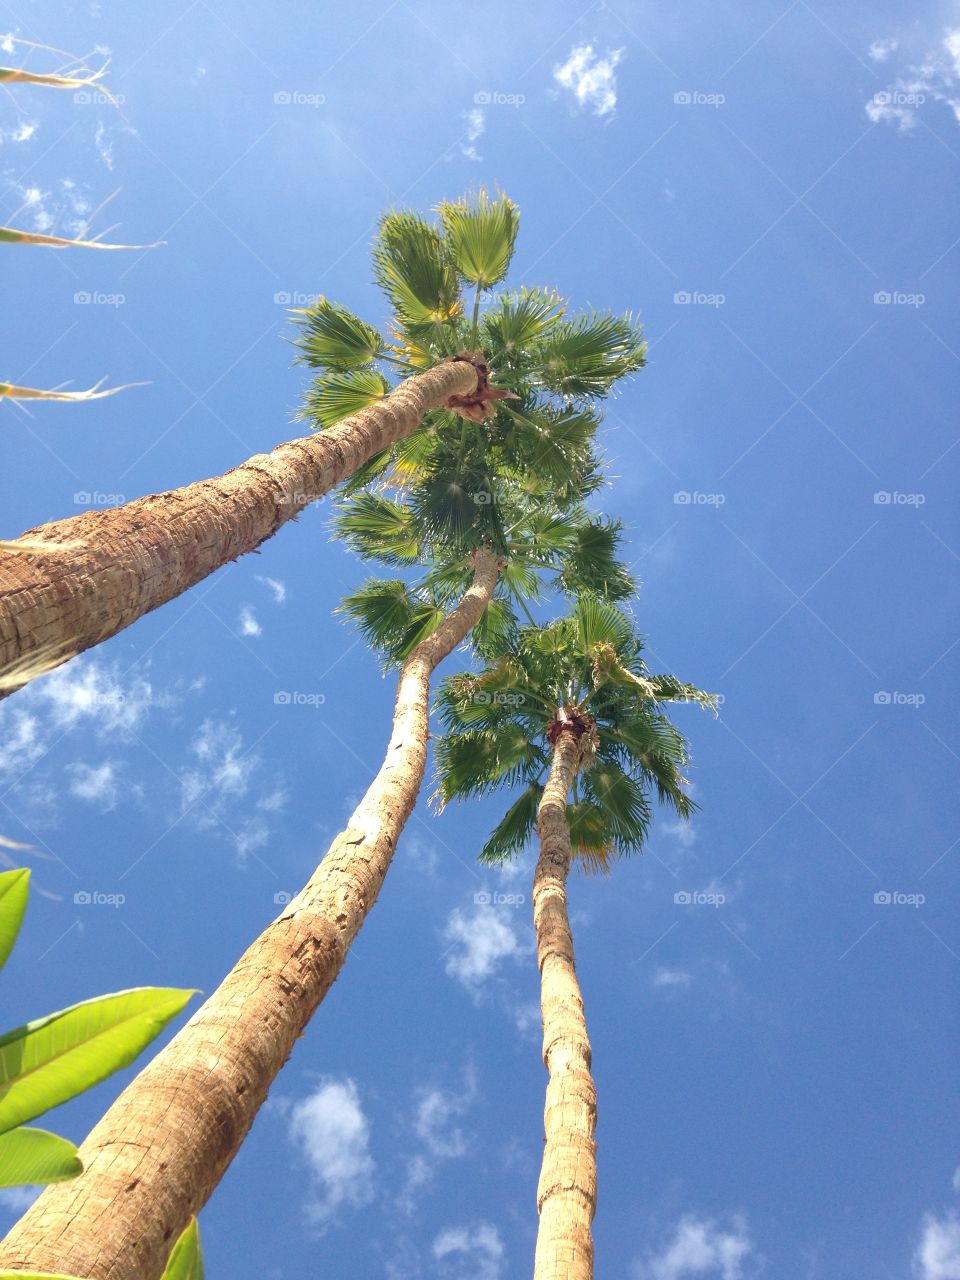 Looking up!! Palm trees in Palm Springs, CA